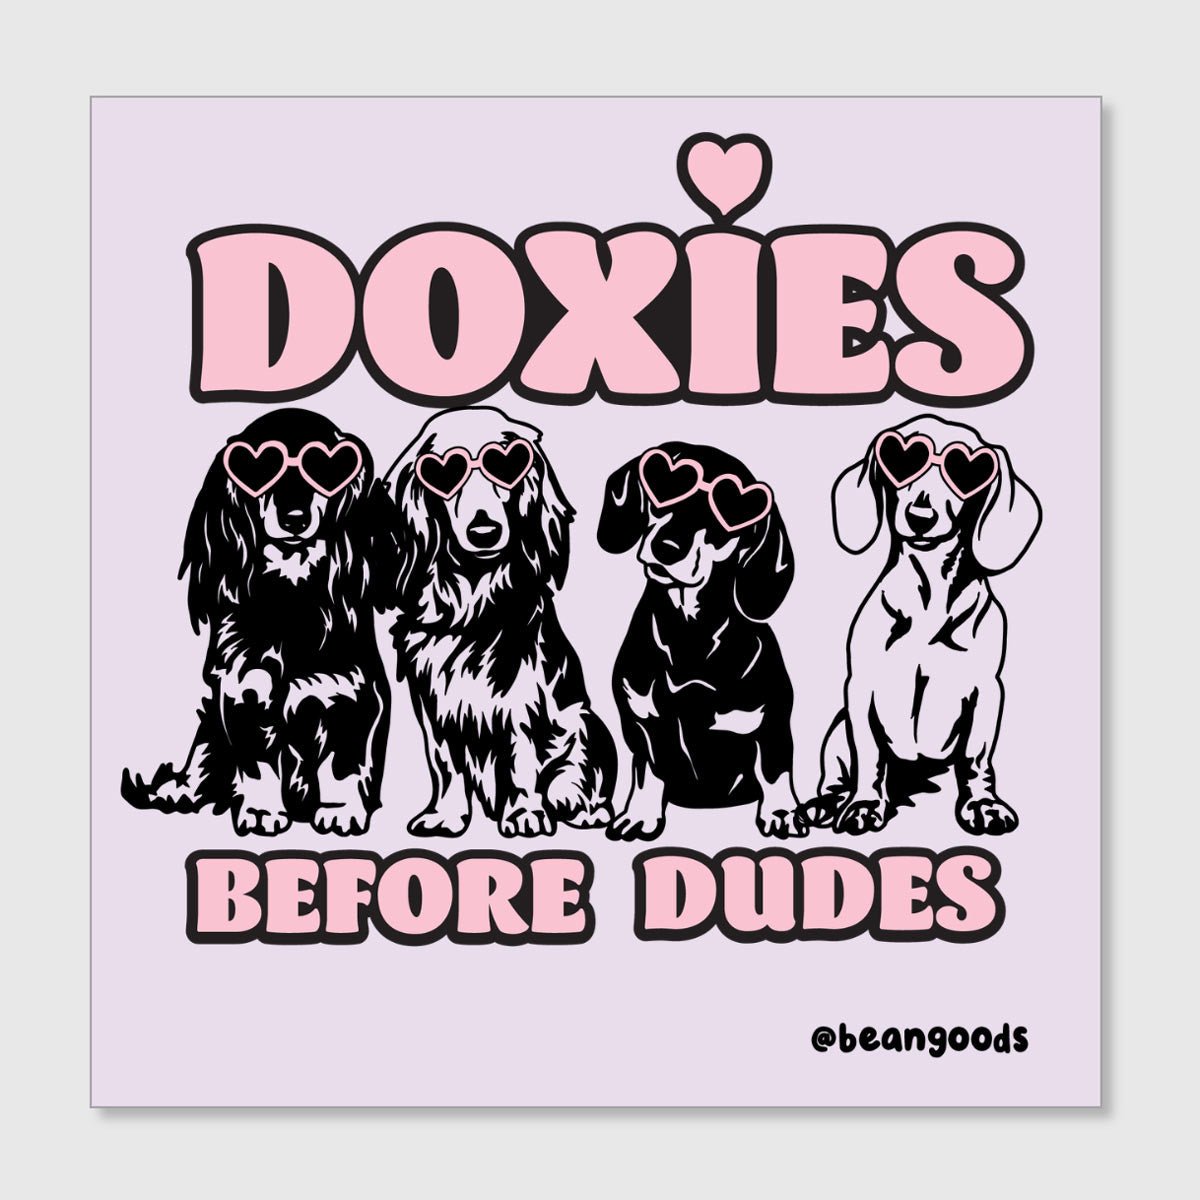 doxies before dudes sticker - bean goods